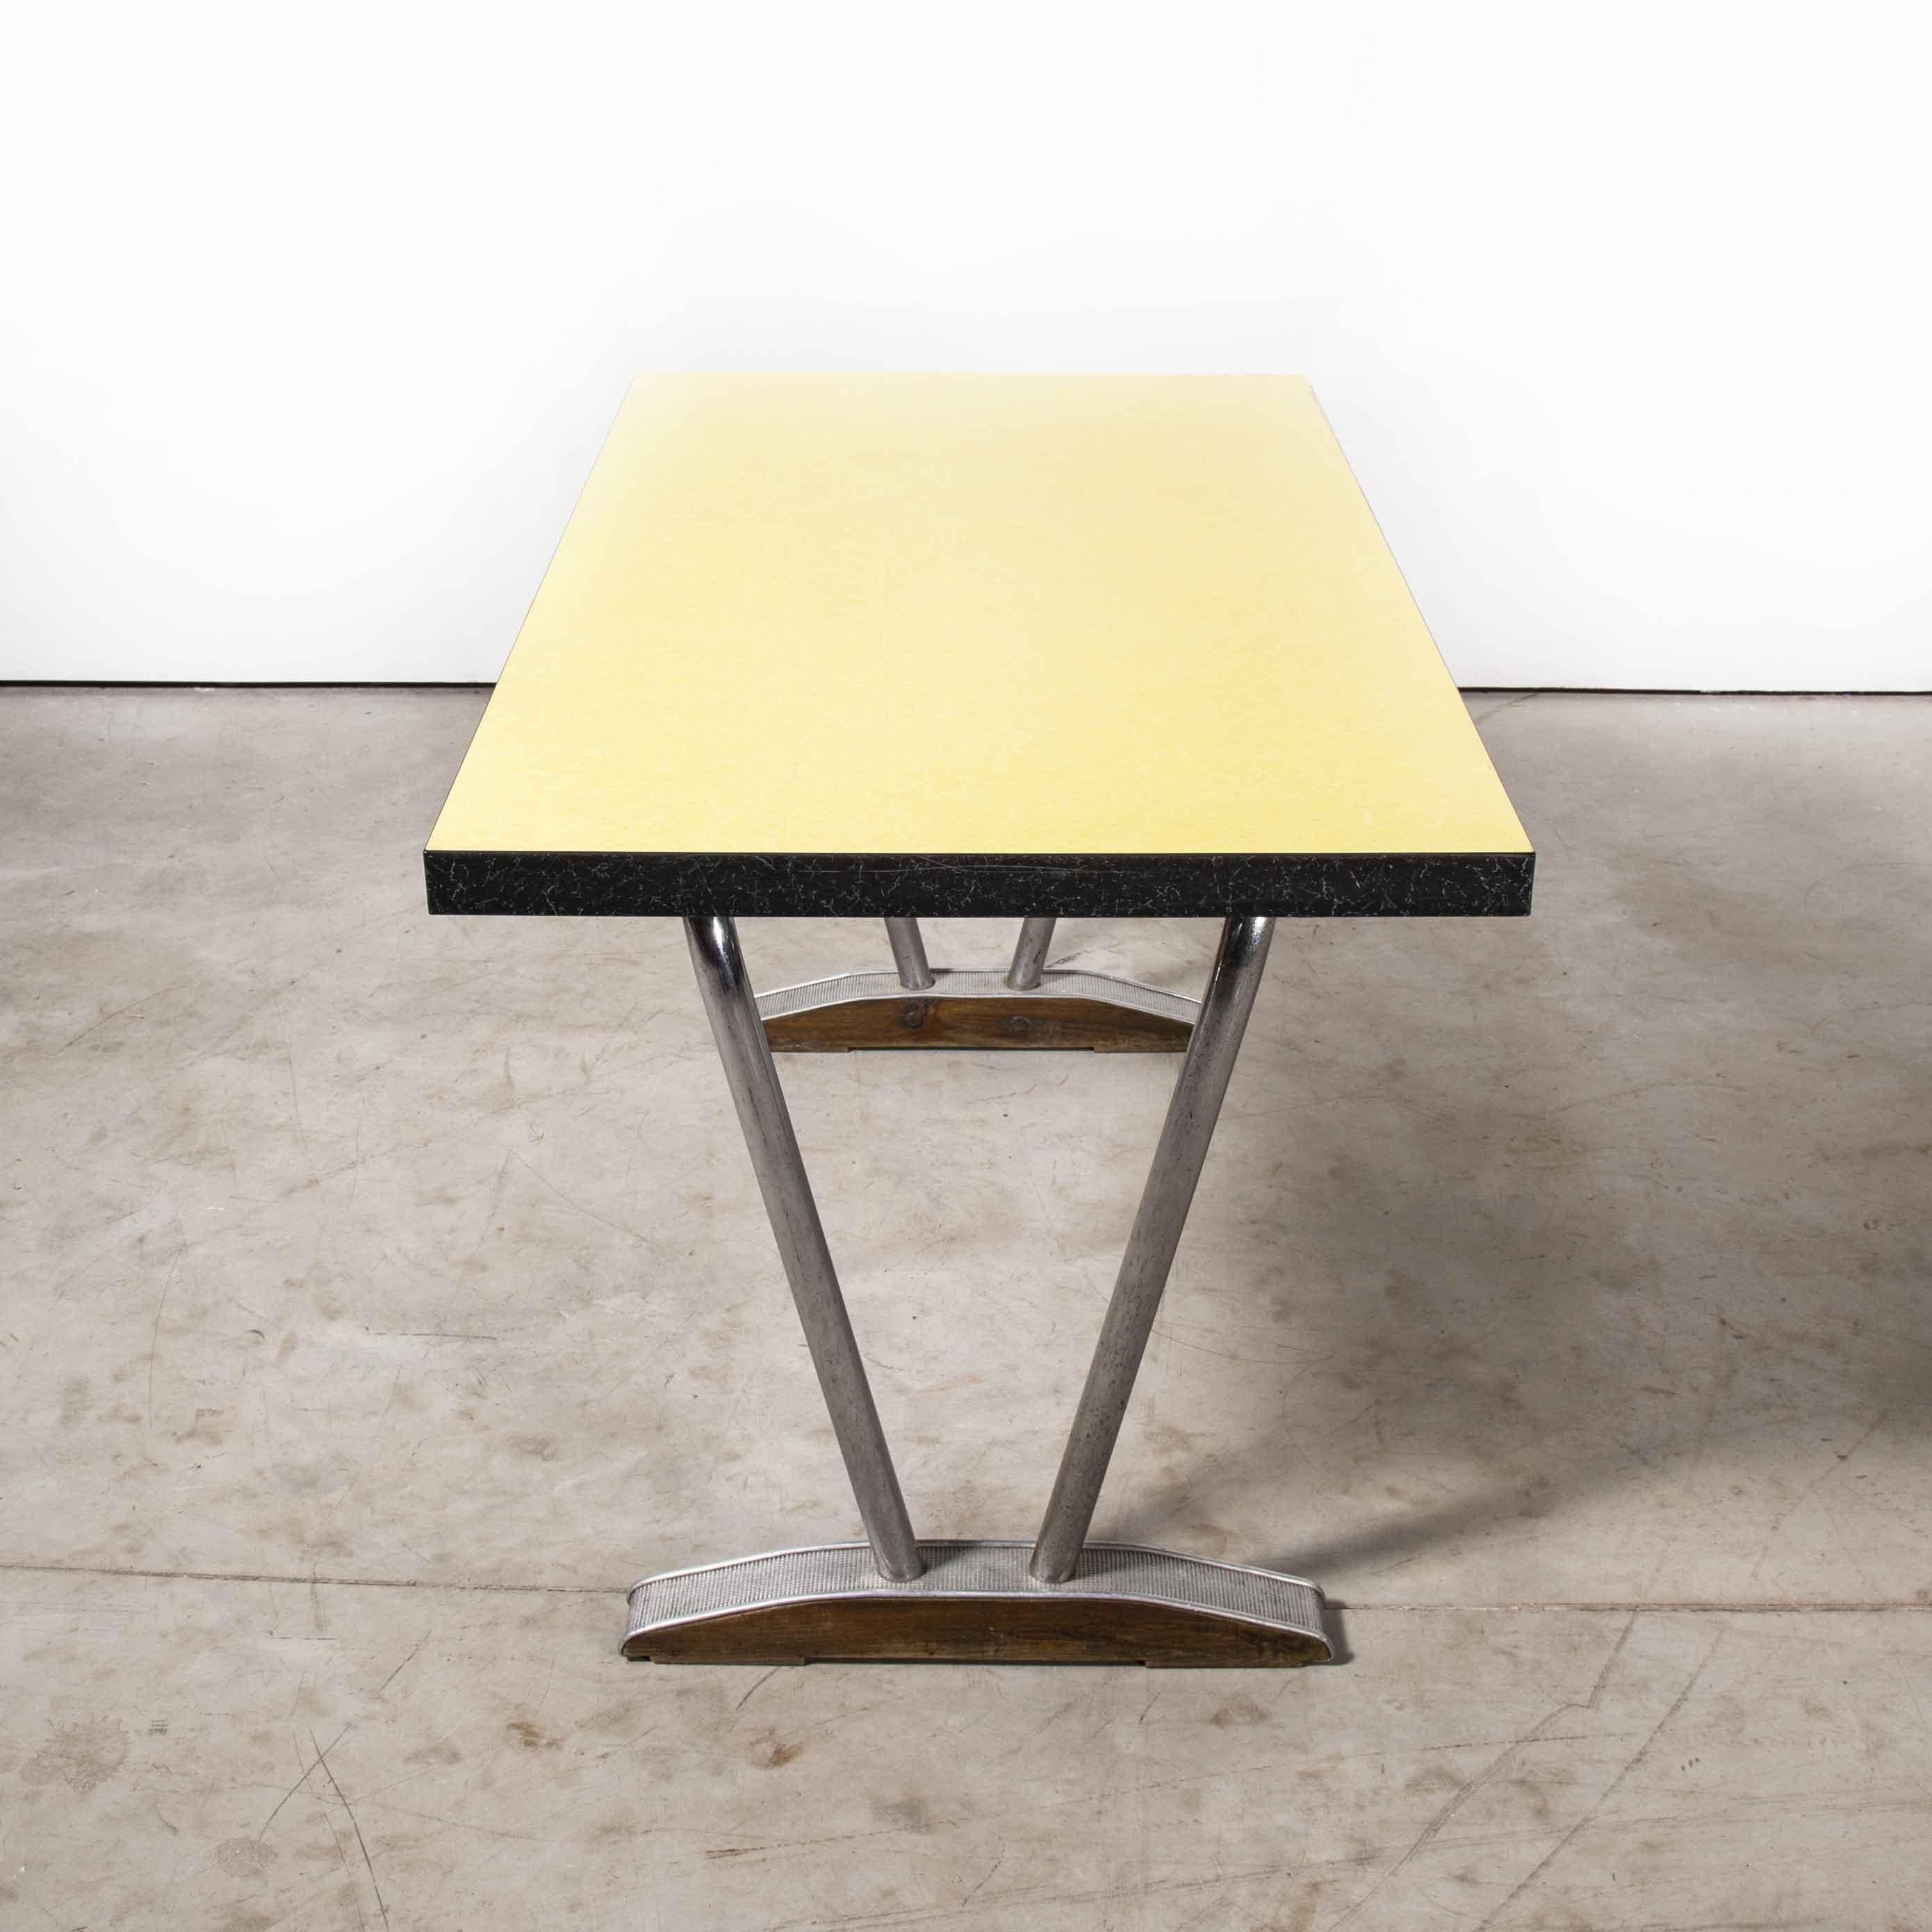 1960’s French Yellow Laminate Dining Table with Aluminium Base, 'Model 779.1' For Sale 1